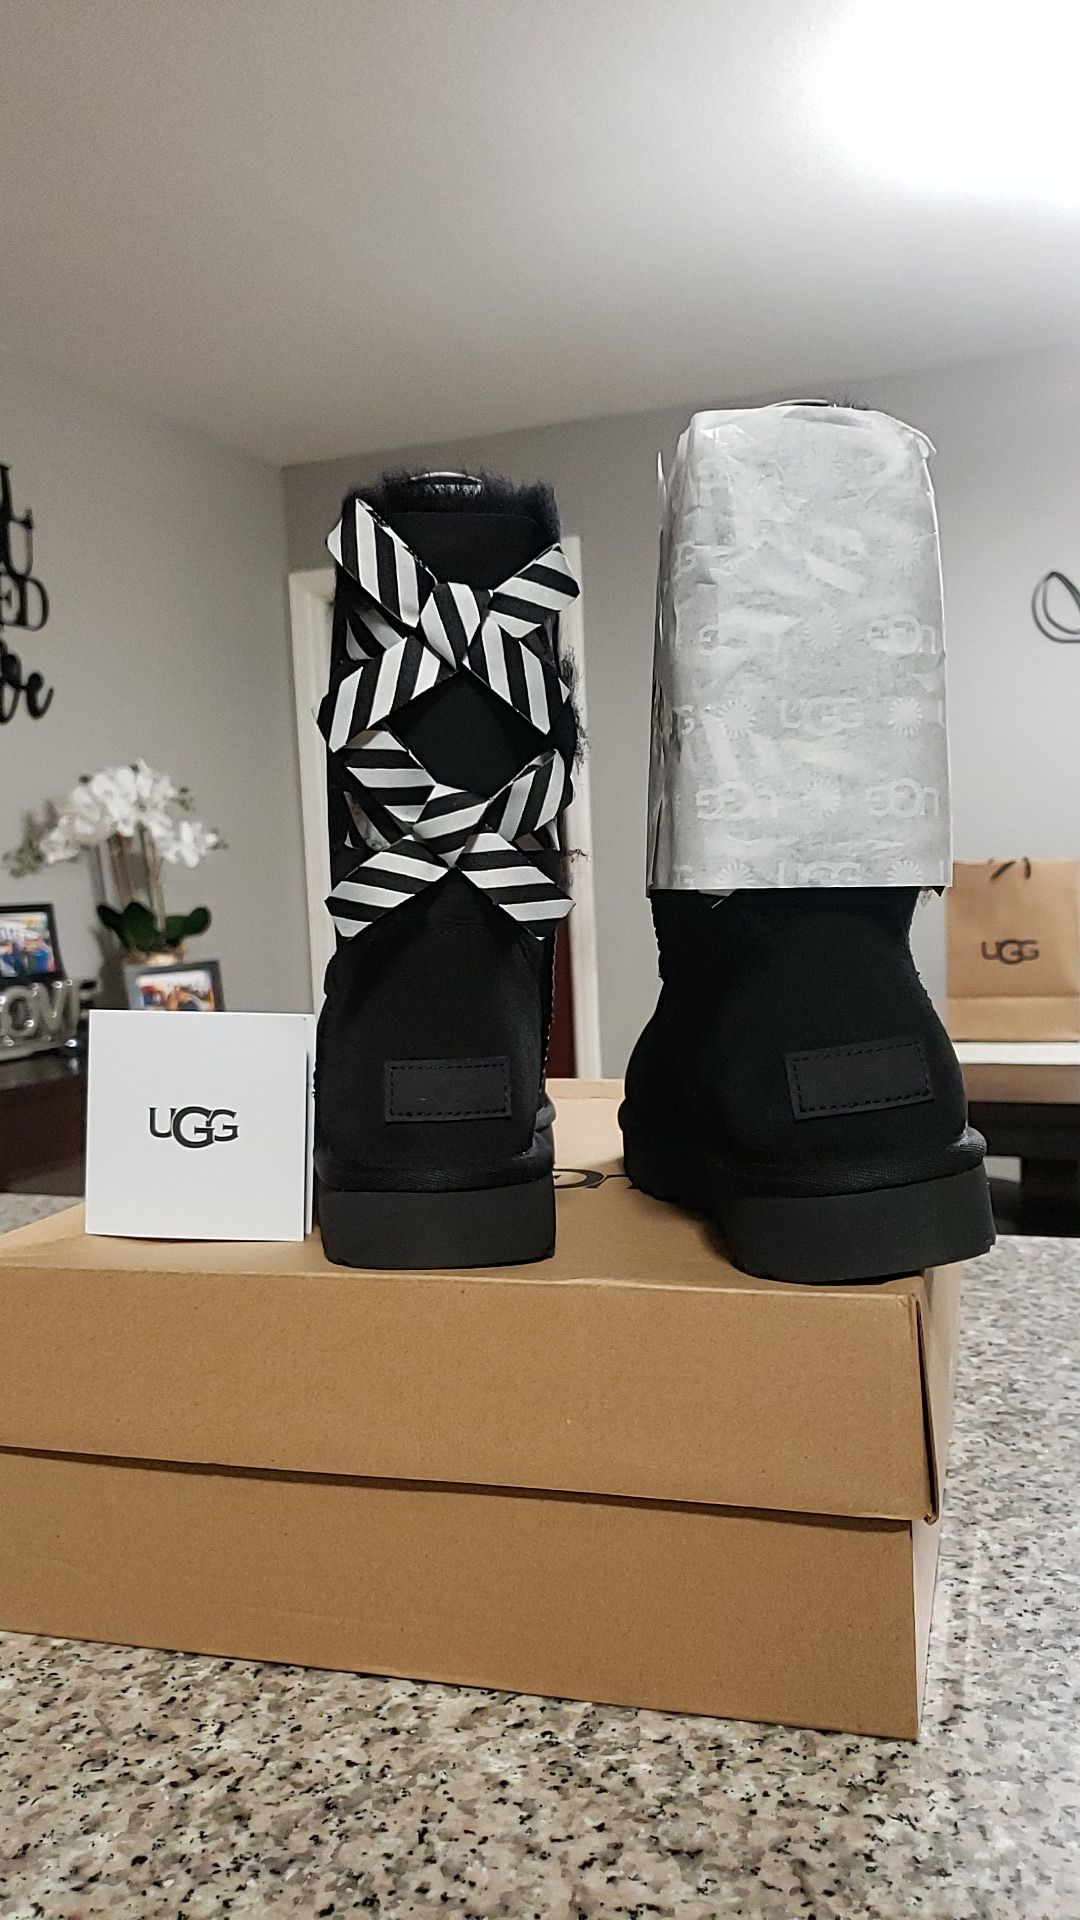 Authentic UGG size 9 NEW